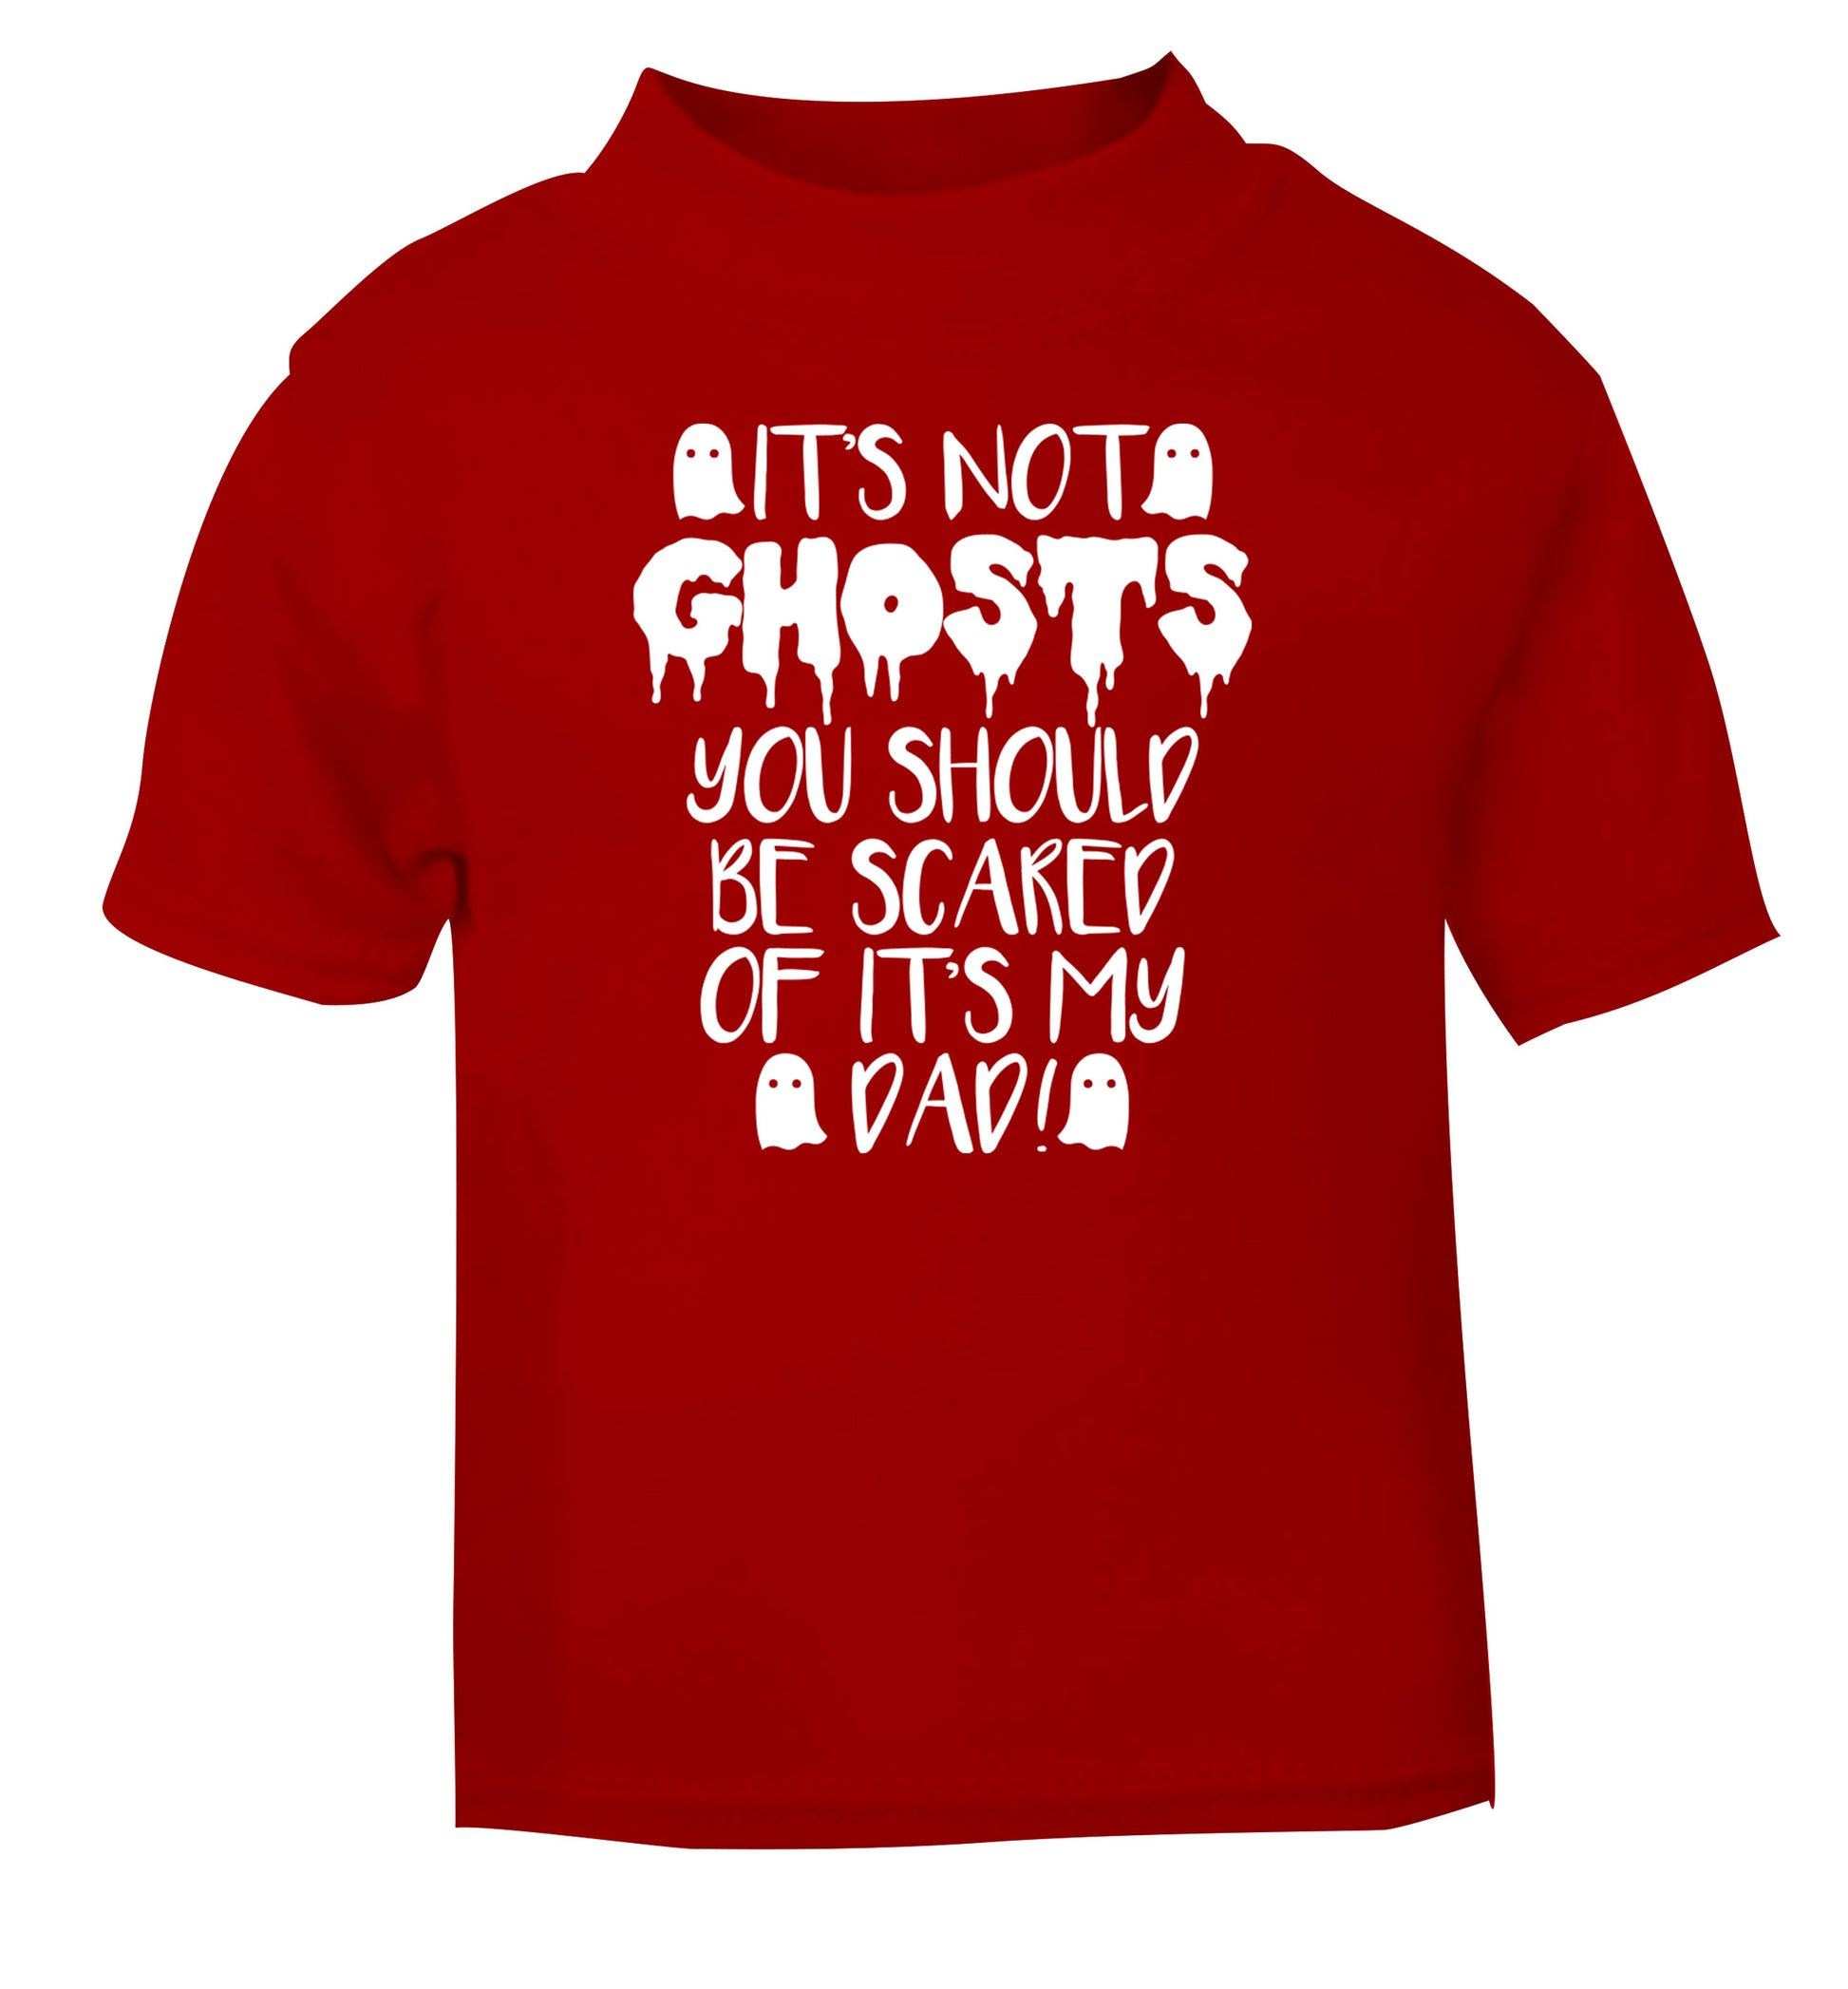 It's not ghosts you should be scared of it's my dad! red Baby Toddler Tshirt 2 Years